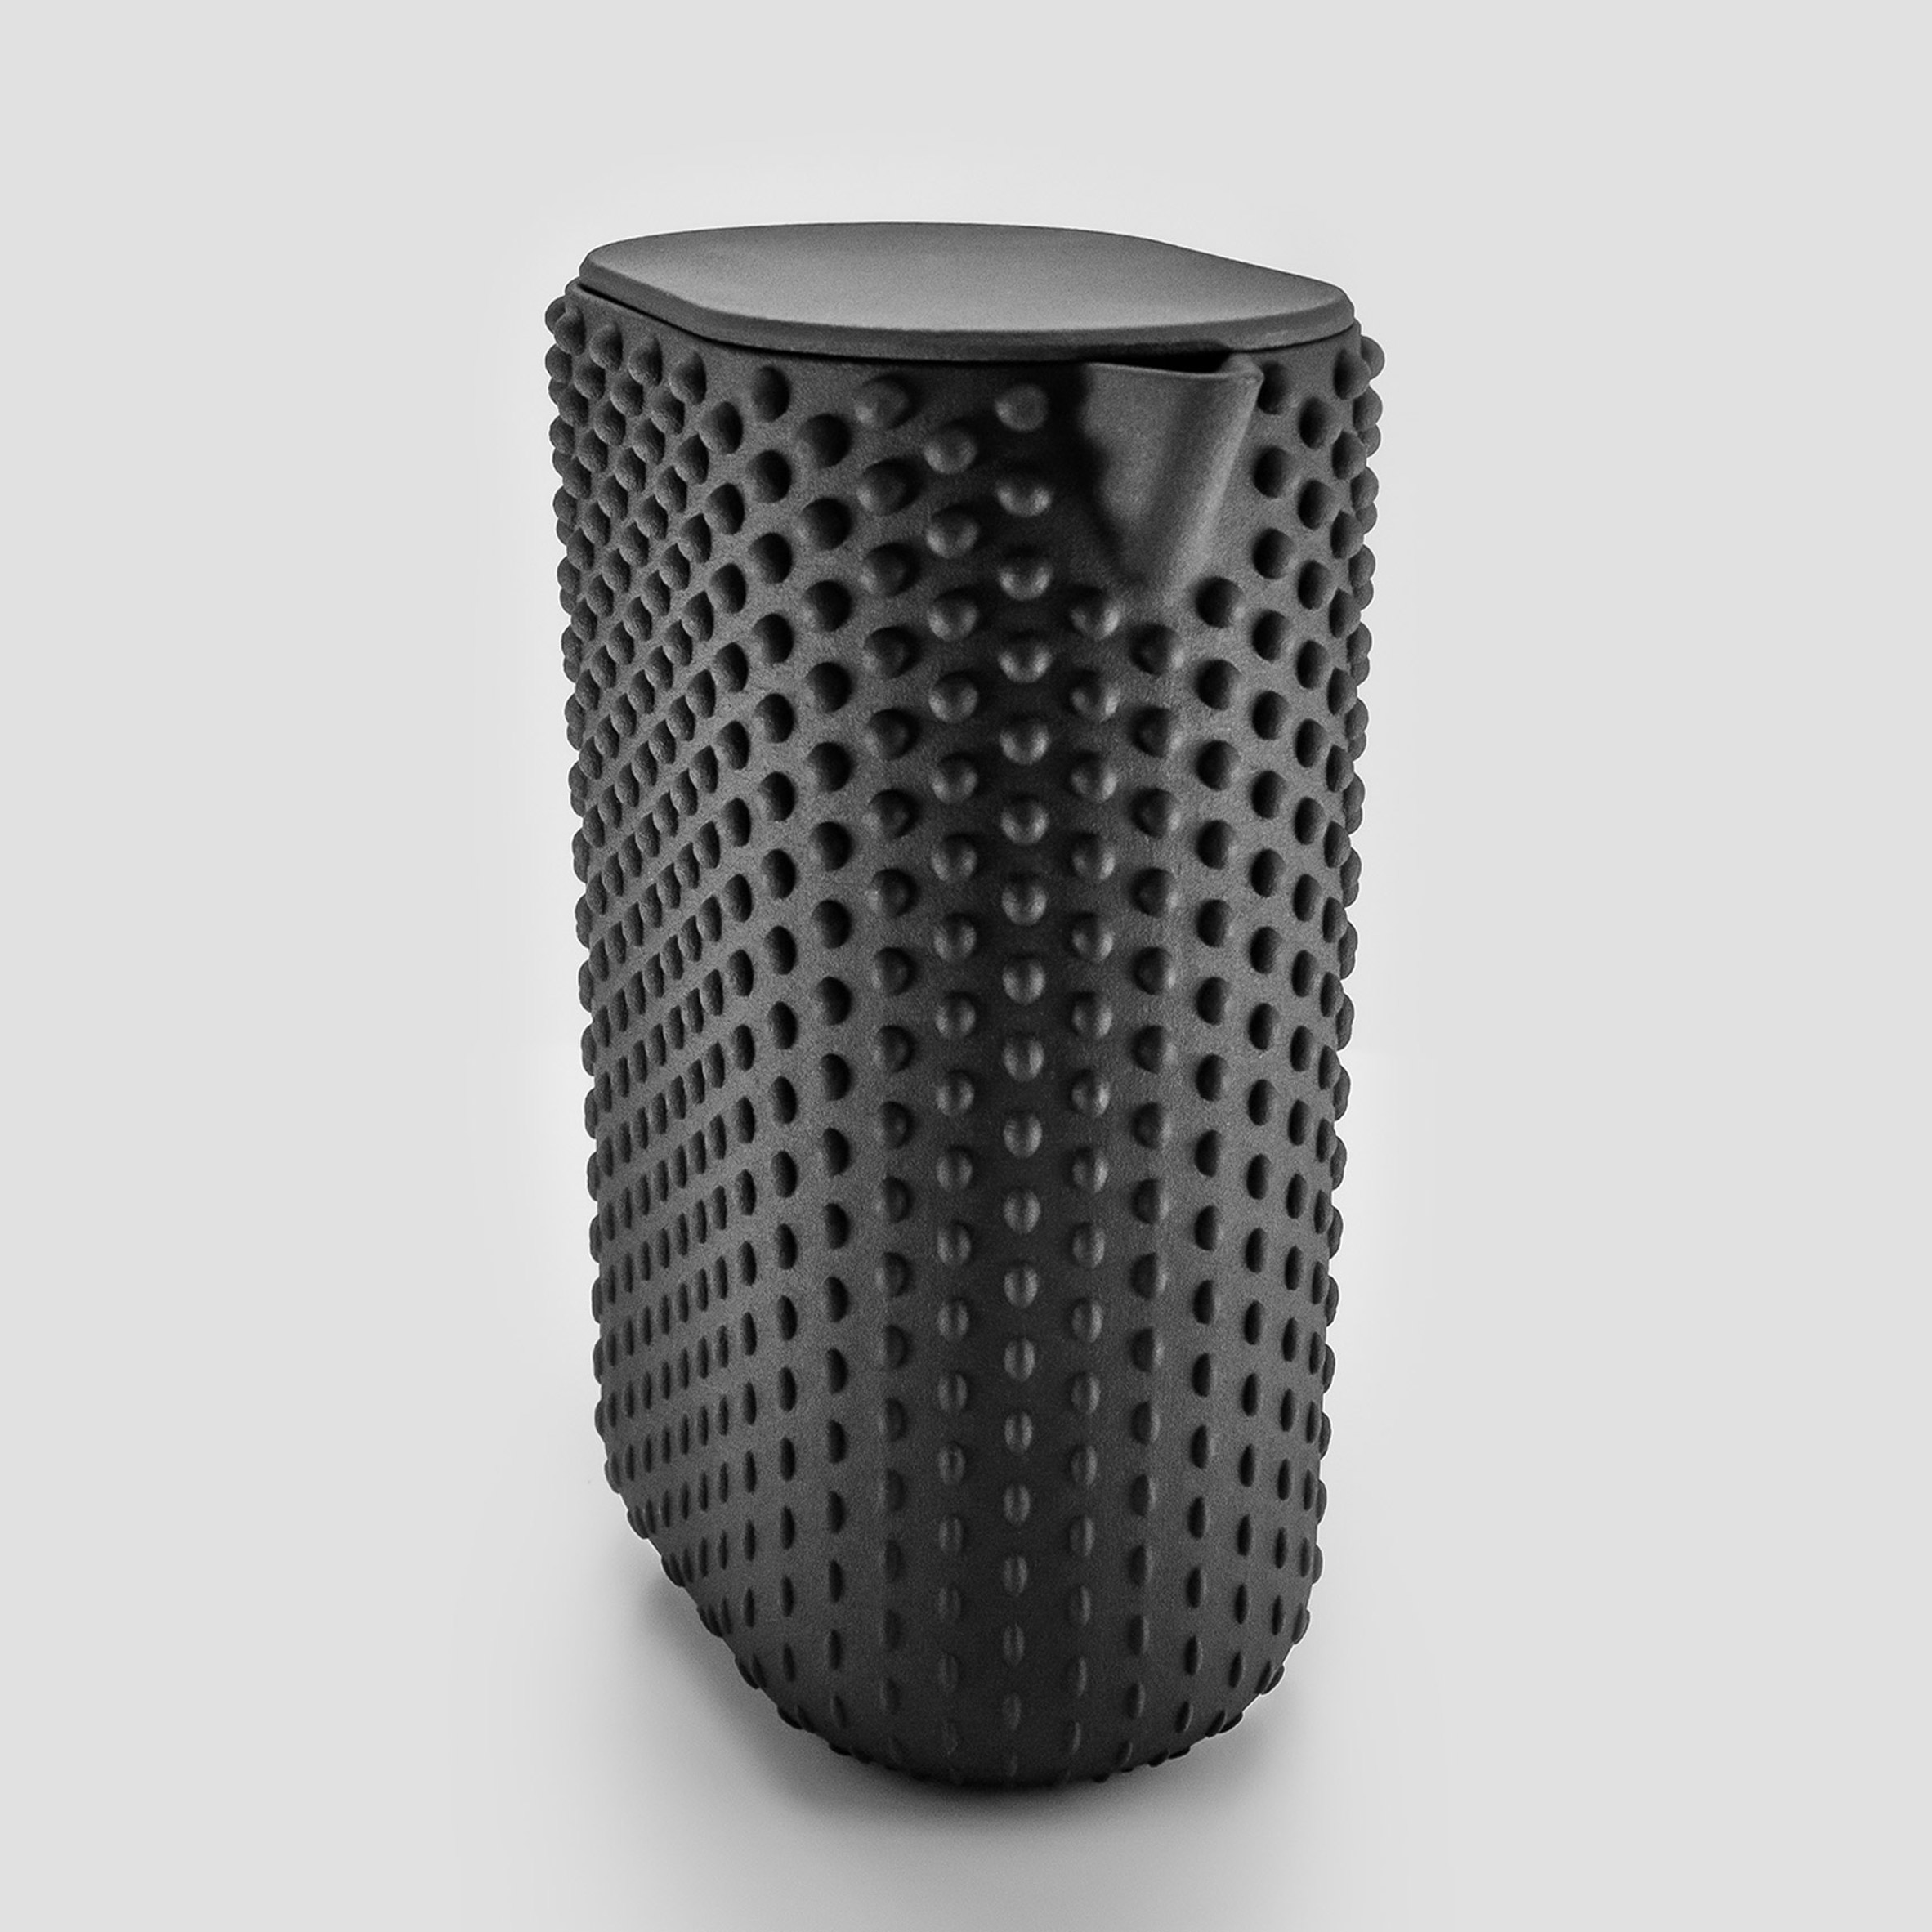 Joe Doucet designs 3D-printed vessels to "represent dining in the 21st century"